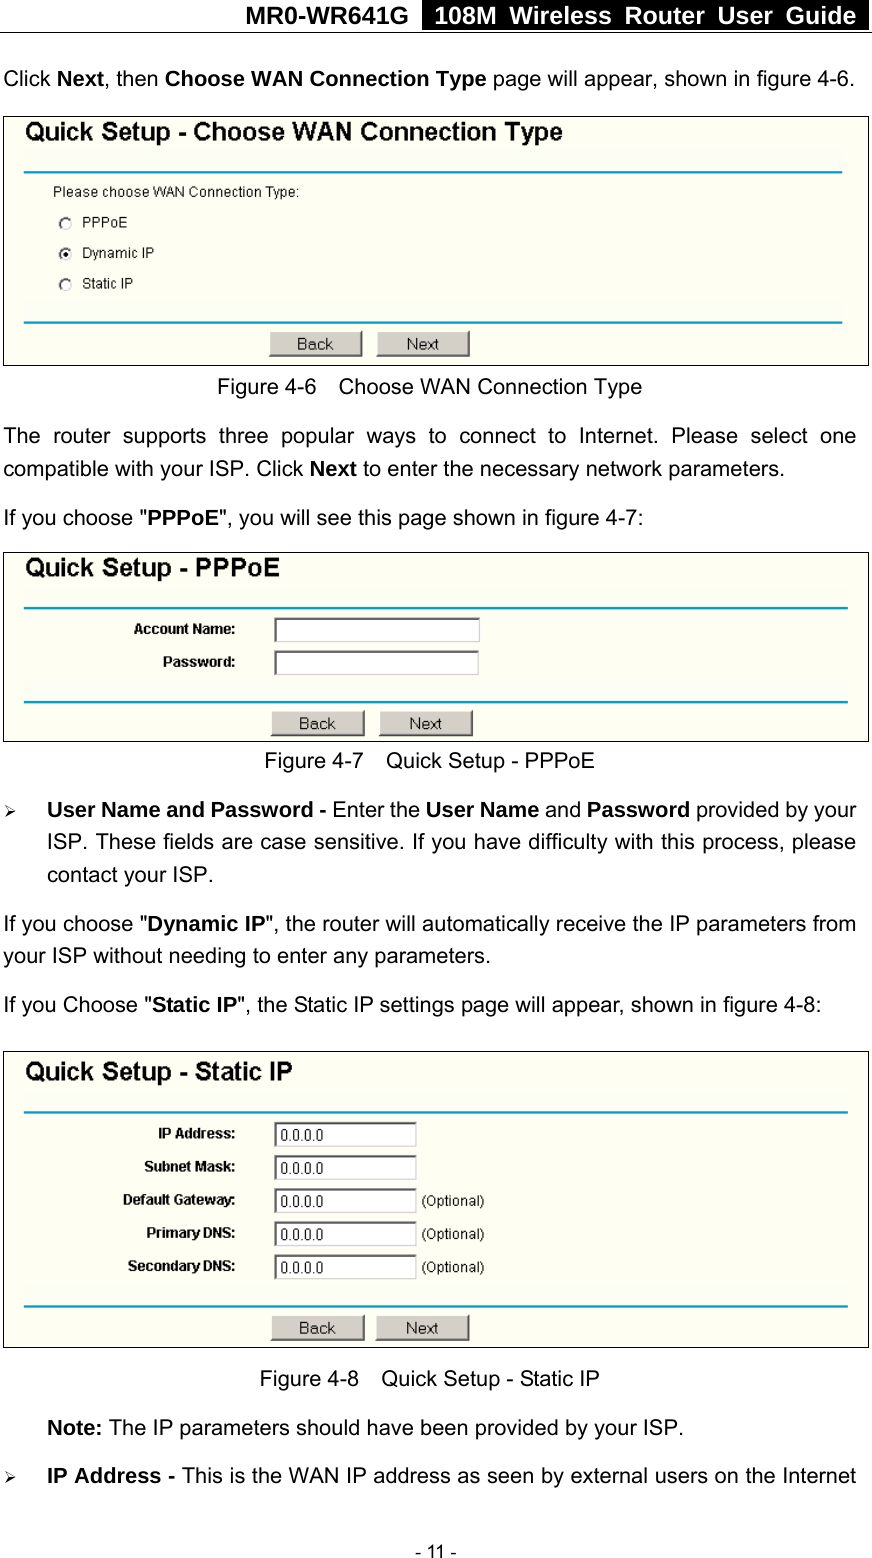 MR0-WR641G   108M Wireless Router User Guide  Click Next, then Choose WAN Connection Type page will appear, shown in figure 4-6.  Figure 4-6    Choose WAN Connection Type The router supports three popular ways to connect to Internet. Please select one compatible with your ISP. Click Next to enter the necessary network parameters. If you choose &quot;PPPoE&quot;, you will see this page shown in figure 4-7:    Figure 4-7    Quick Setup - PPPoE ¾ User Name and Password - Enter the User Name and Password provided by your ISP. These fields are case sensitive. If you have difficulty with this process, please contact your ISP. If you choose &quot;Dynamic IP&quot;, the router will automatically receive the IP parameters from your ISP without needing to enter any parameters. If you Choose &quot;Static IP&quot;, the Static IP settings page will appear, shown in figure 4-8:    Figure 4-8    Quick Setup - Static IP  Note: The IP parameters should have been provided by your ISP. ¾ IP Address - This is the WAN IP address as seen by external users on the Internet  - 11 - 